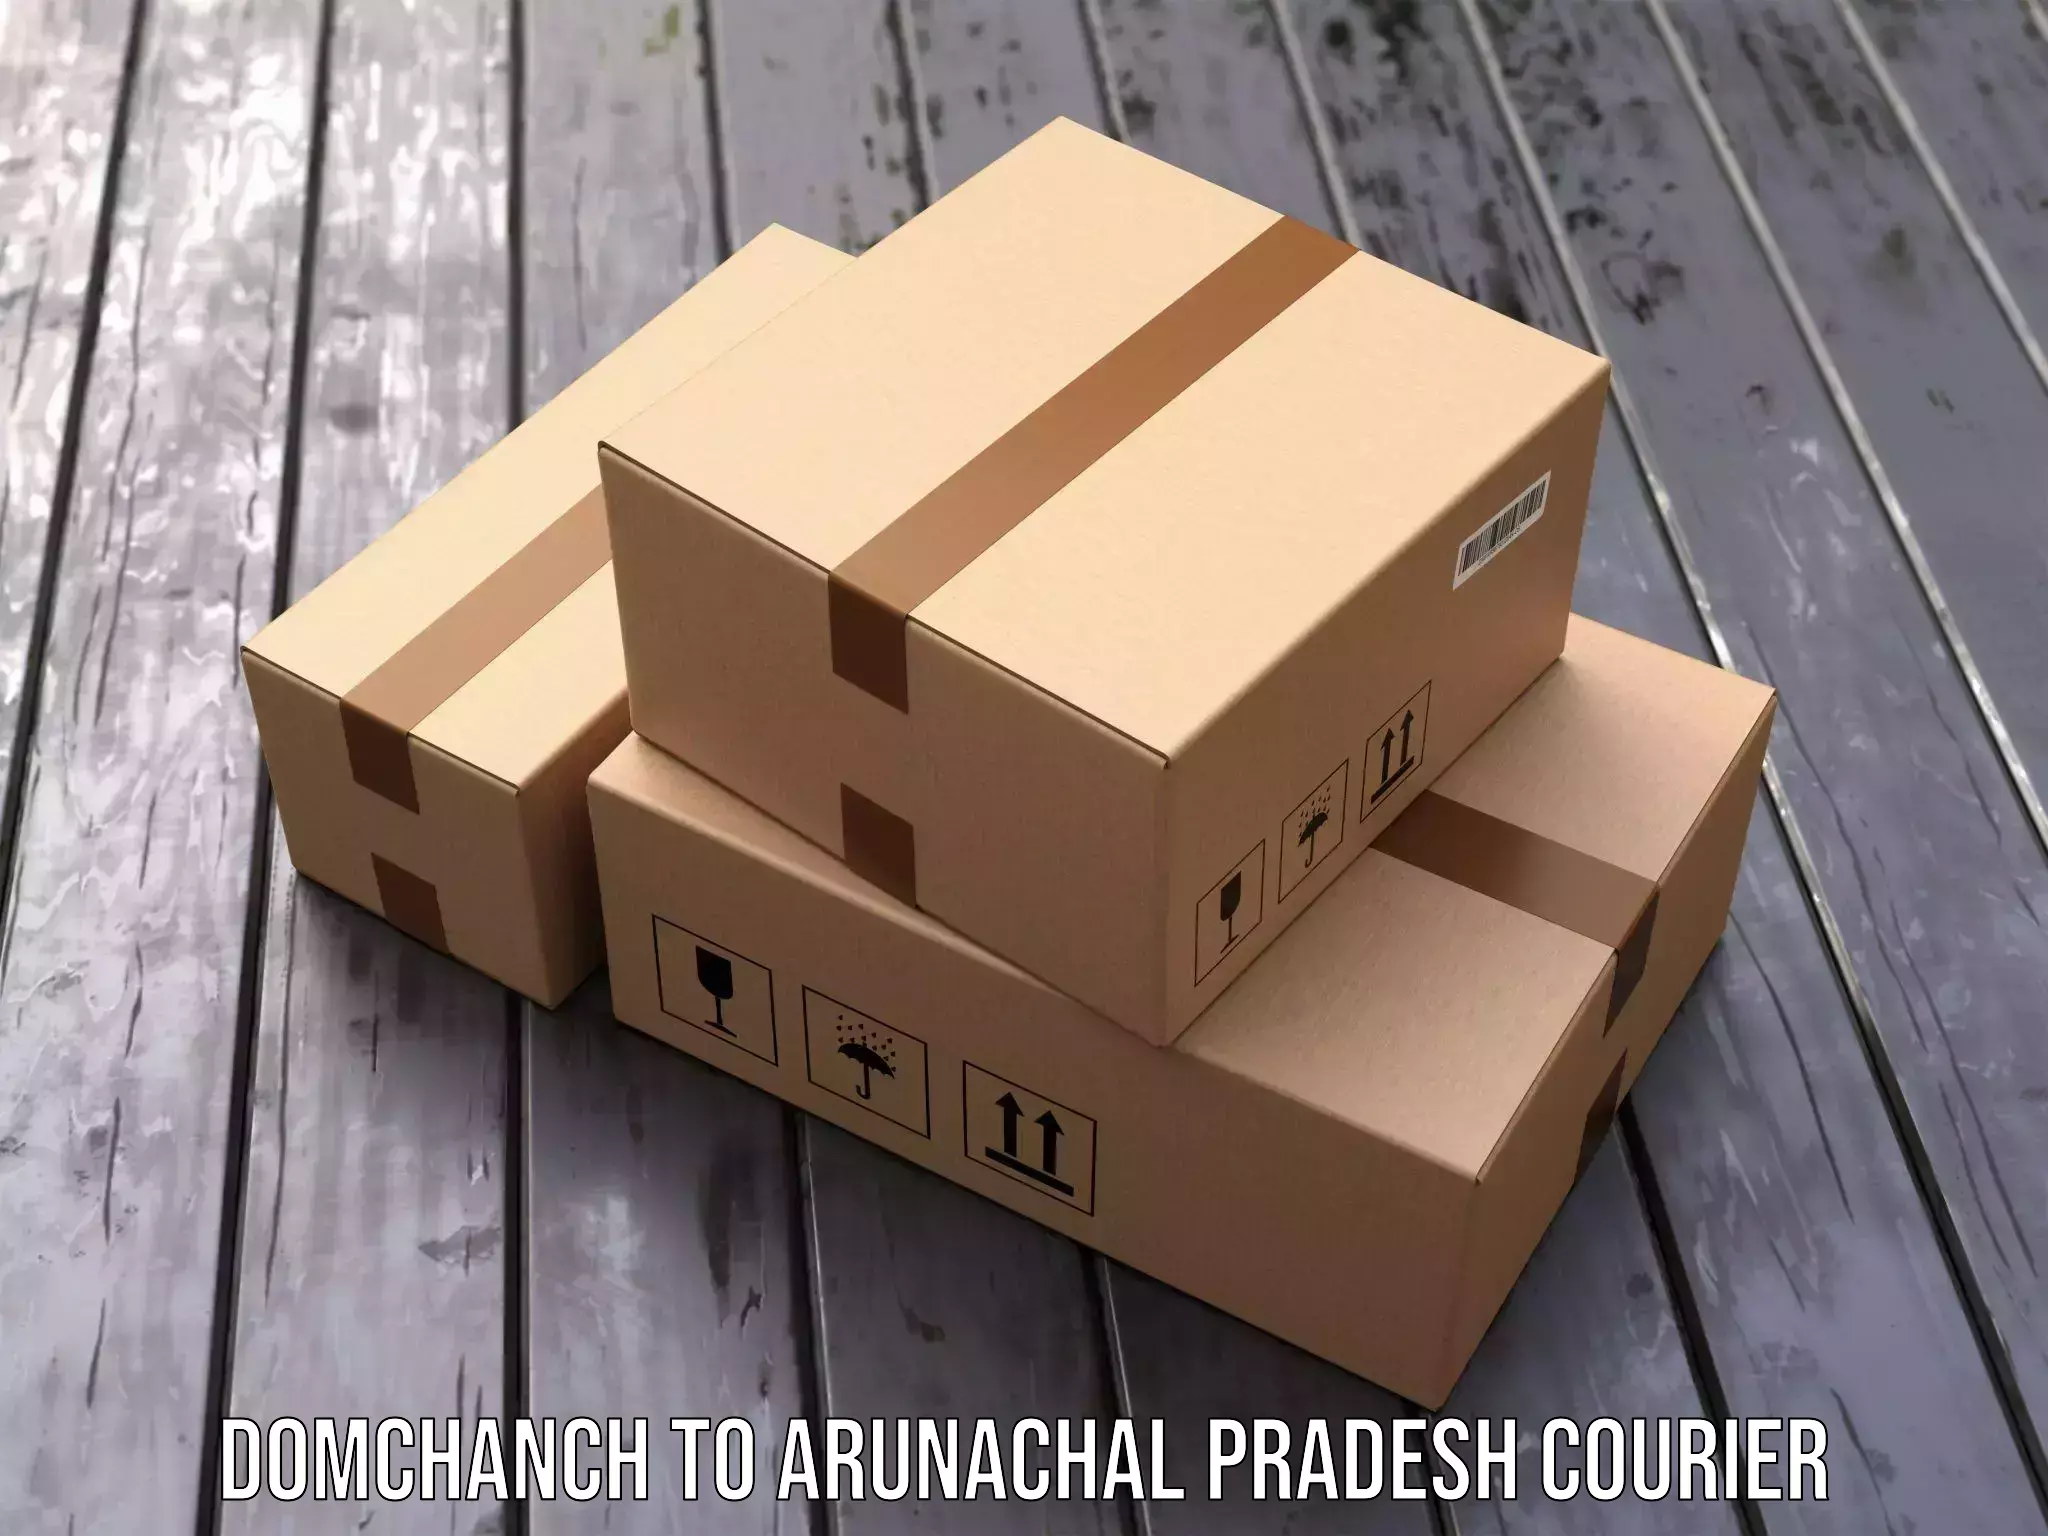 24-hour courier service Domchanch to Lohit